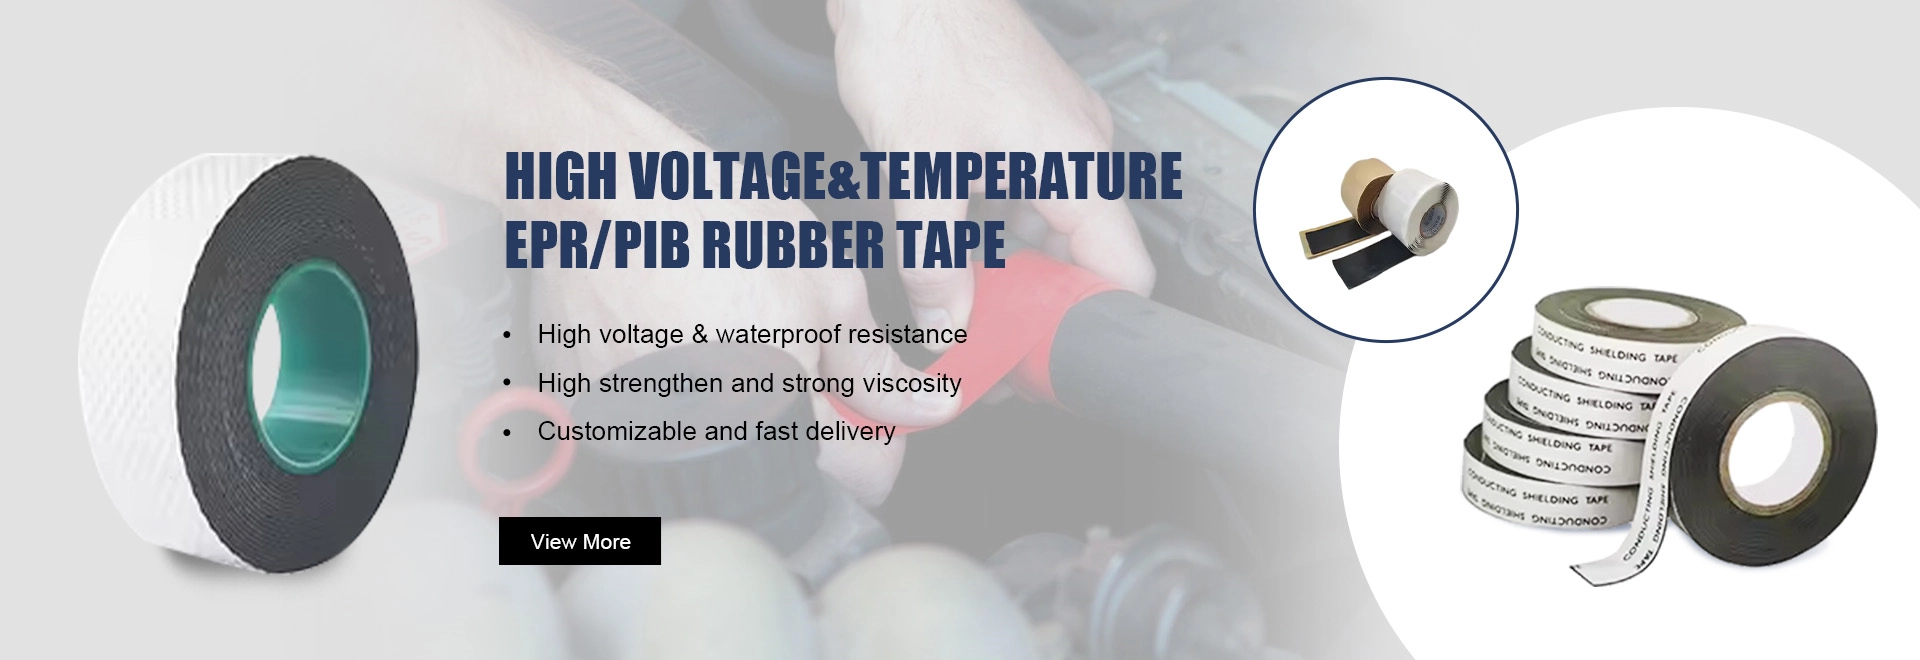 Read More About electrical rubber tape